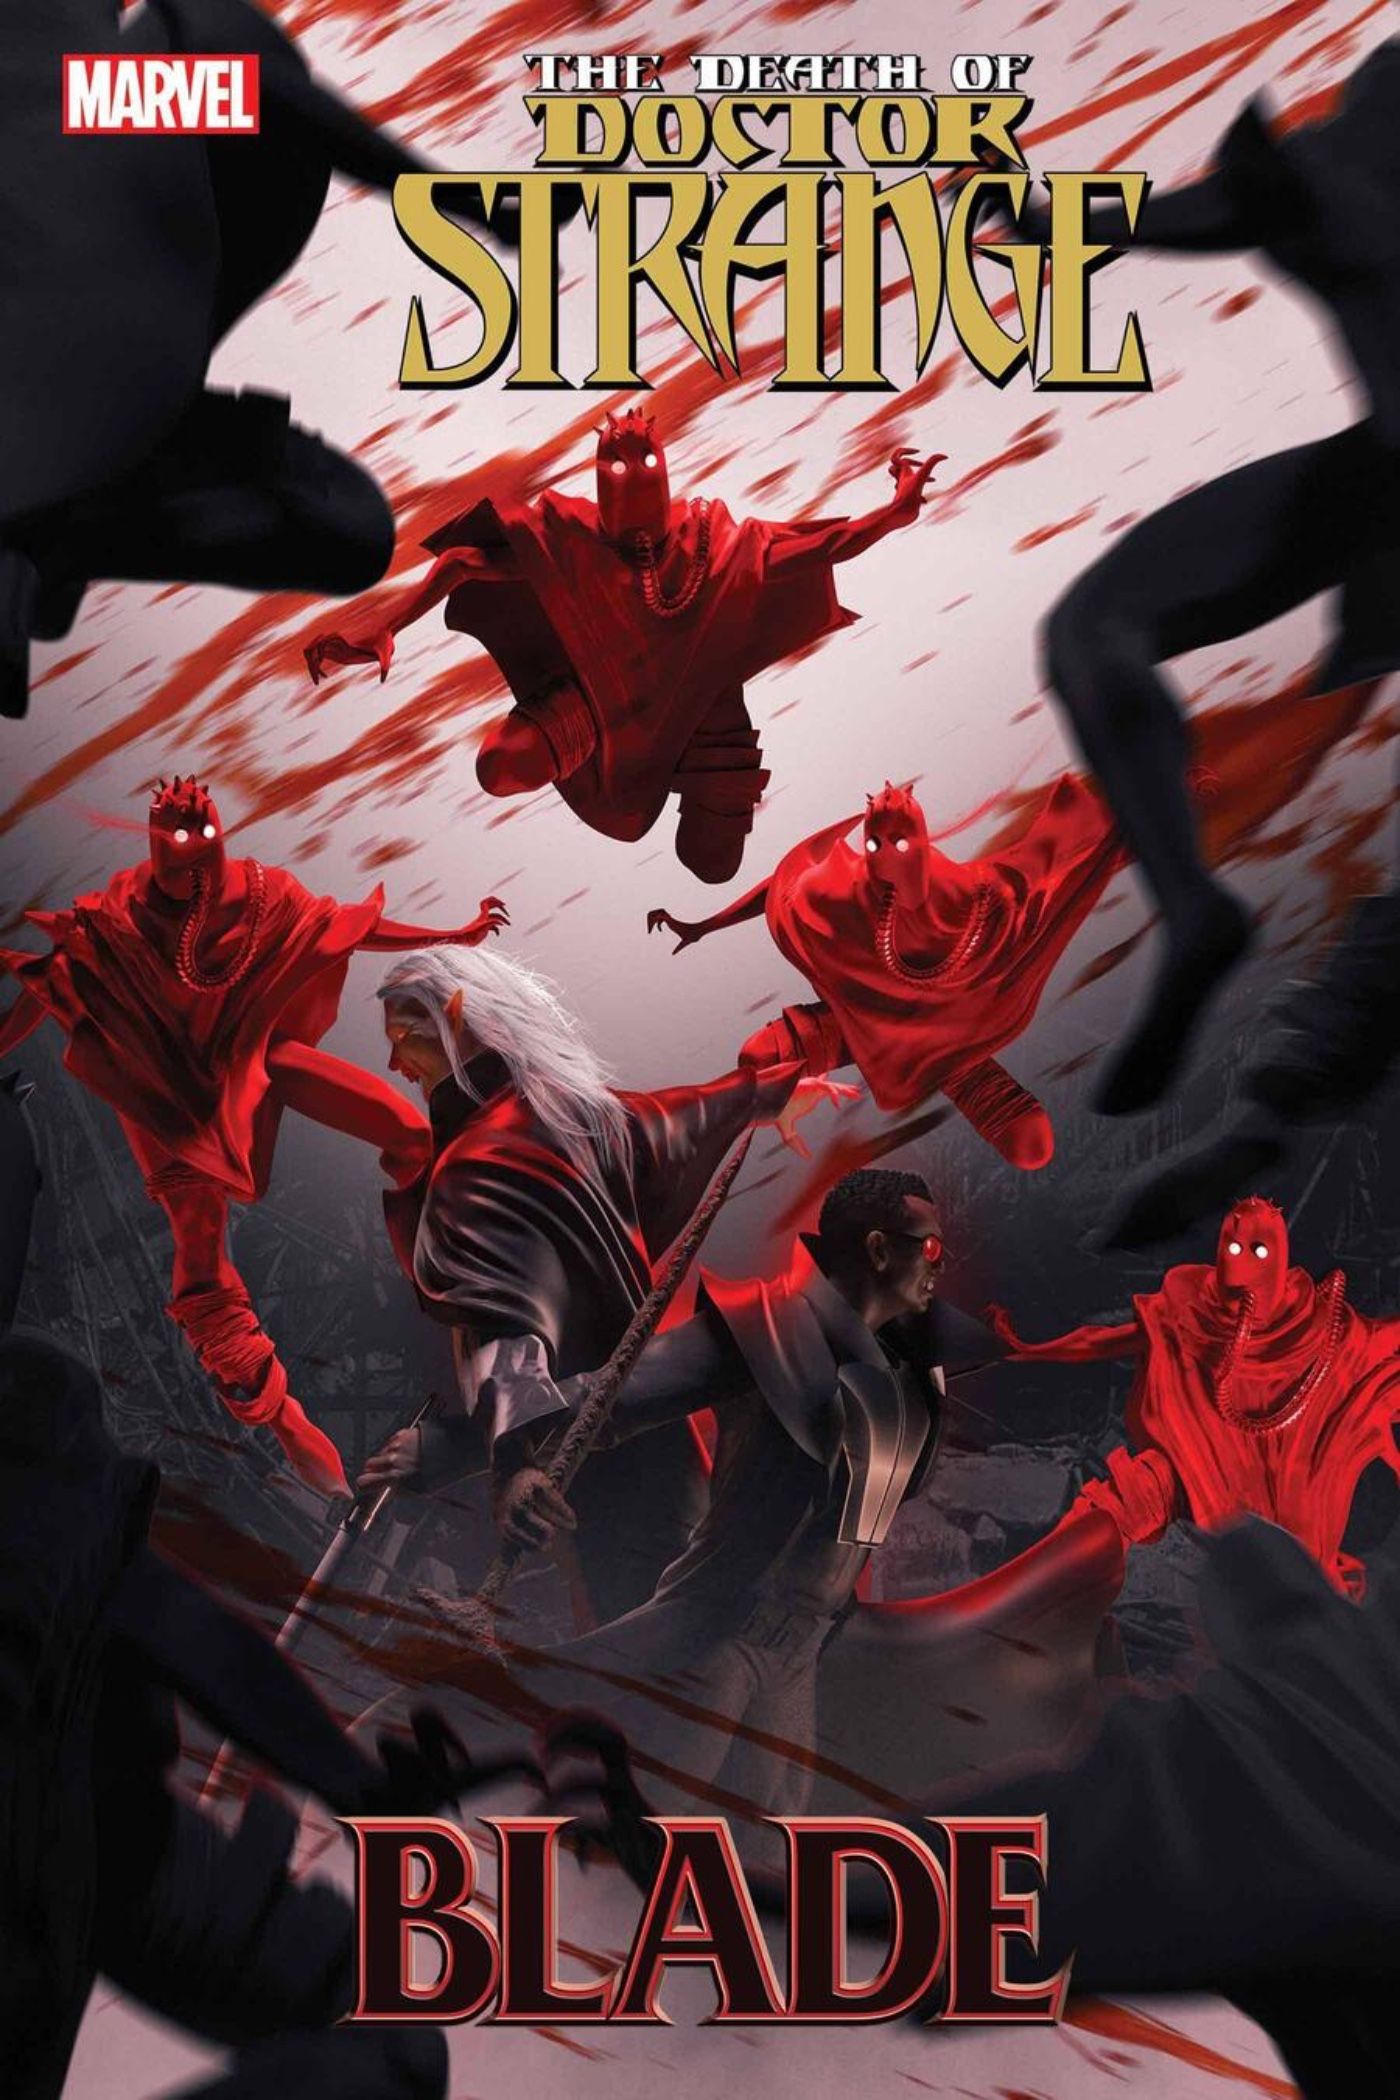 Dracula and Blade are fighting red-clad invaders from another dimension